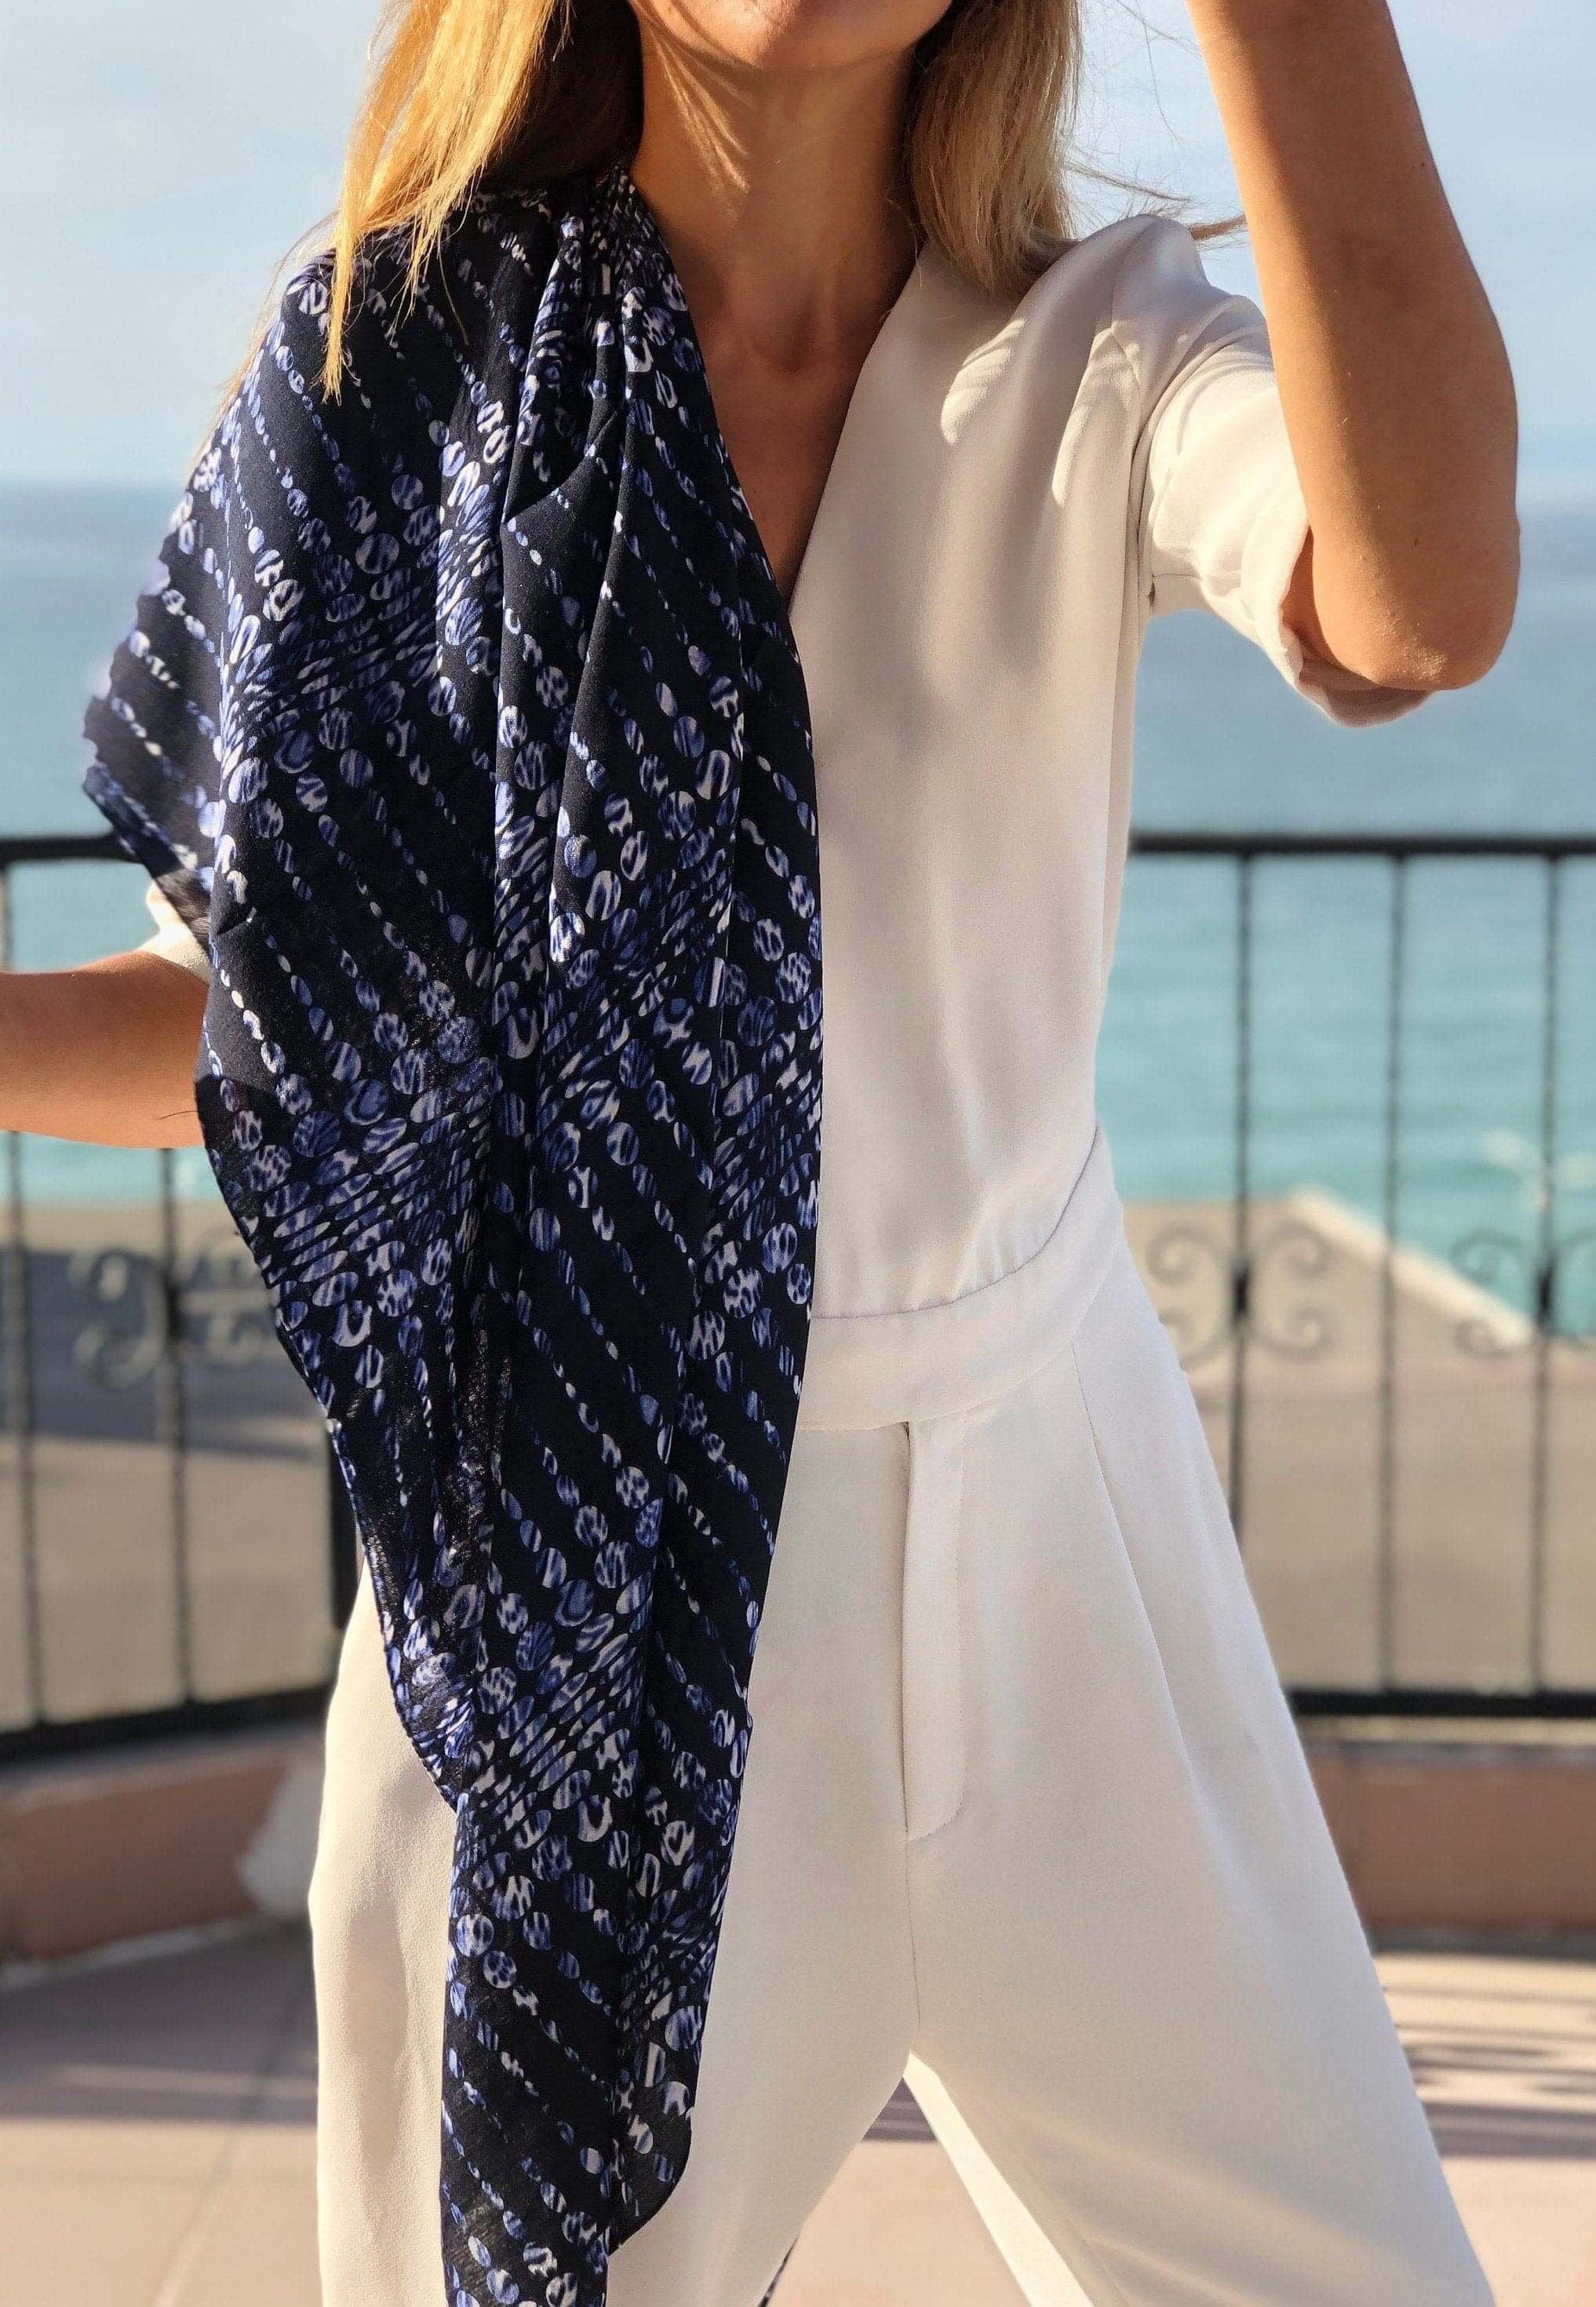 Versatile Dark Blue and White Scarf - Can be dressed up or down for any occasion.